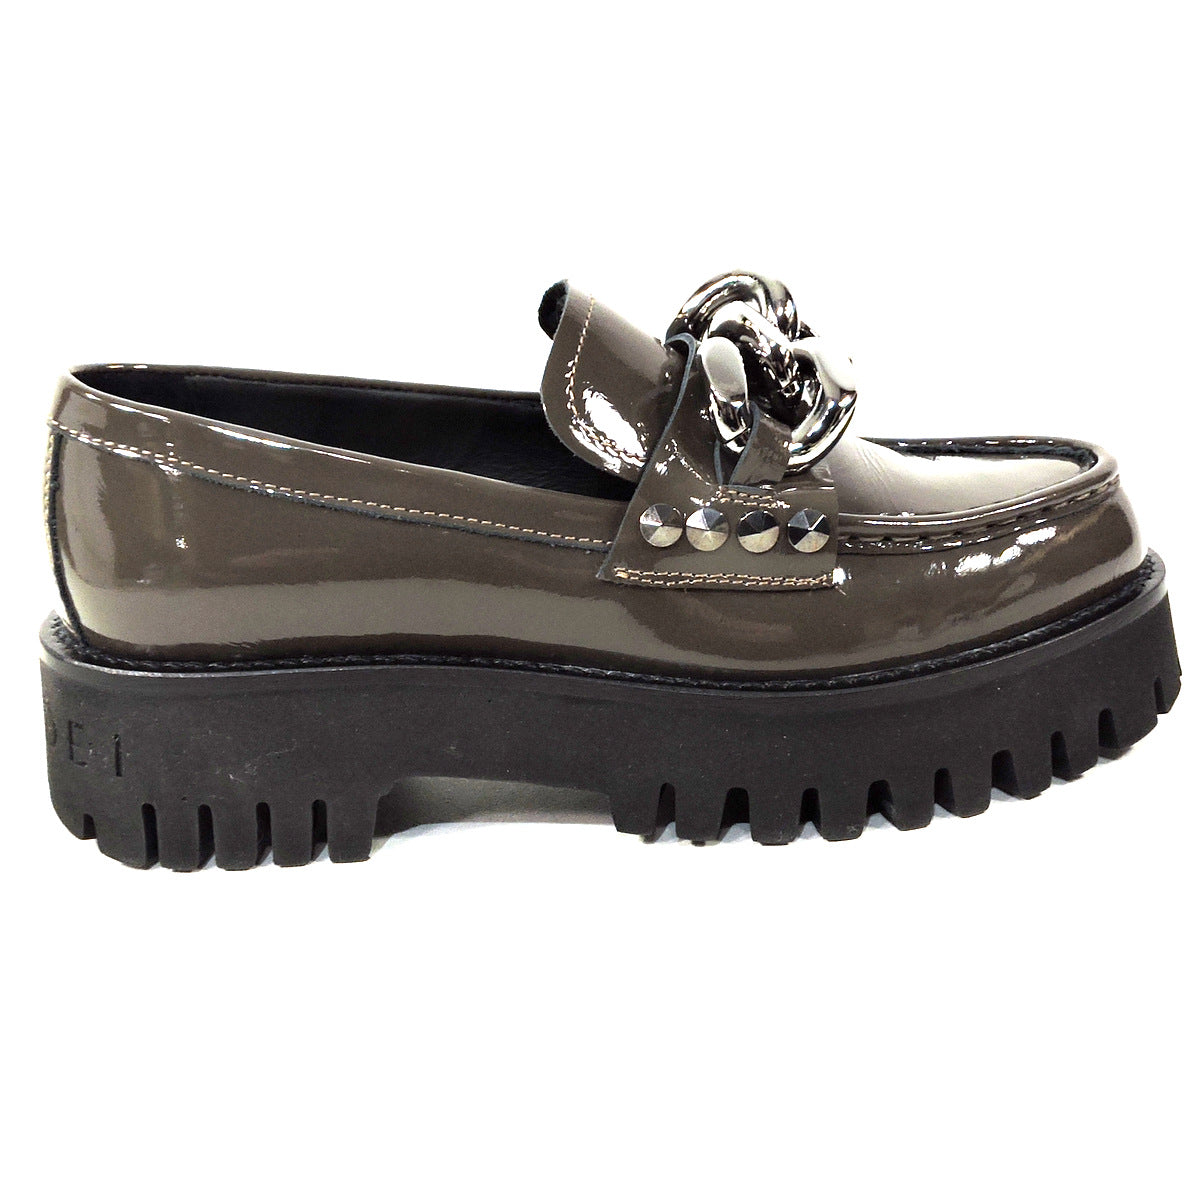 CASADEI 🇮🇹 WOMEN'S BROWN PATENT LEATHER COMFORT SPRING LOAFERS